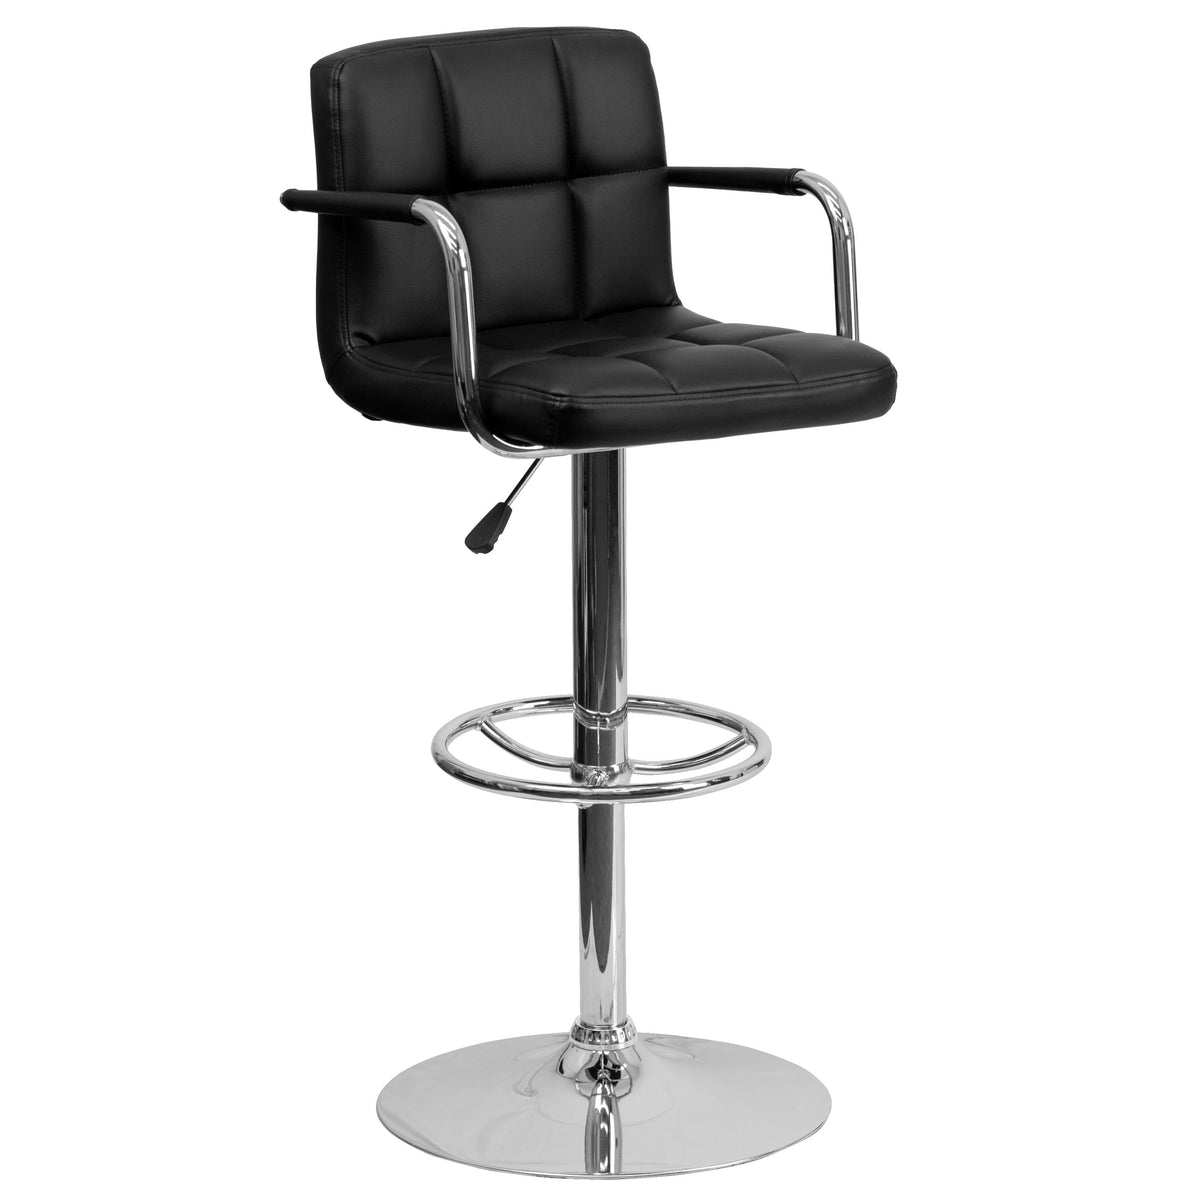 Black |#| Black Quilted Vinyl Adjustable Height Barstool with Arms and Chrome Base